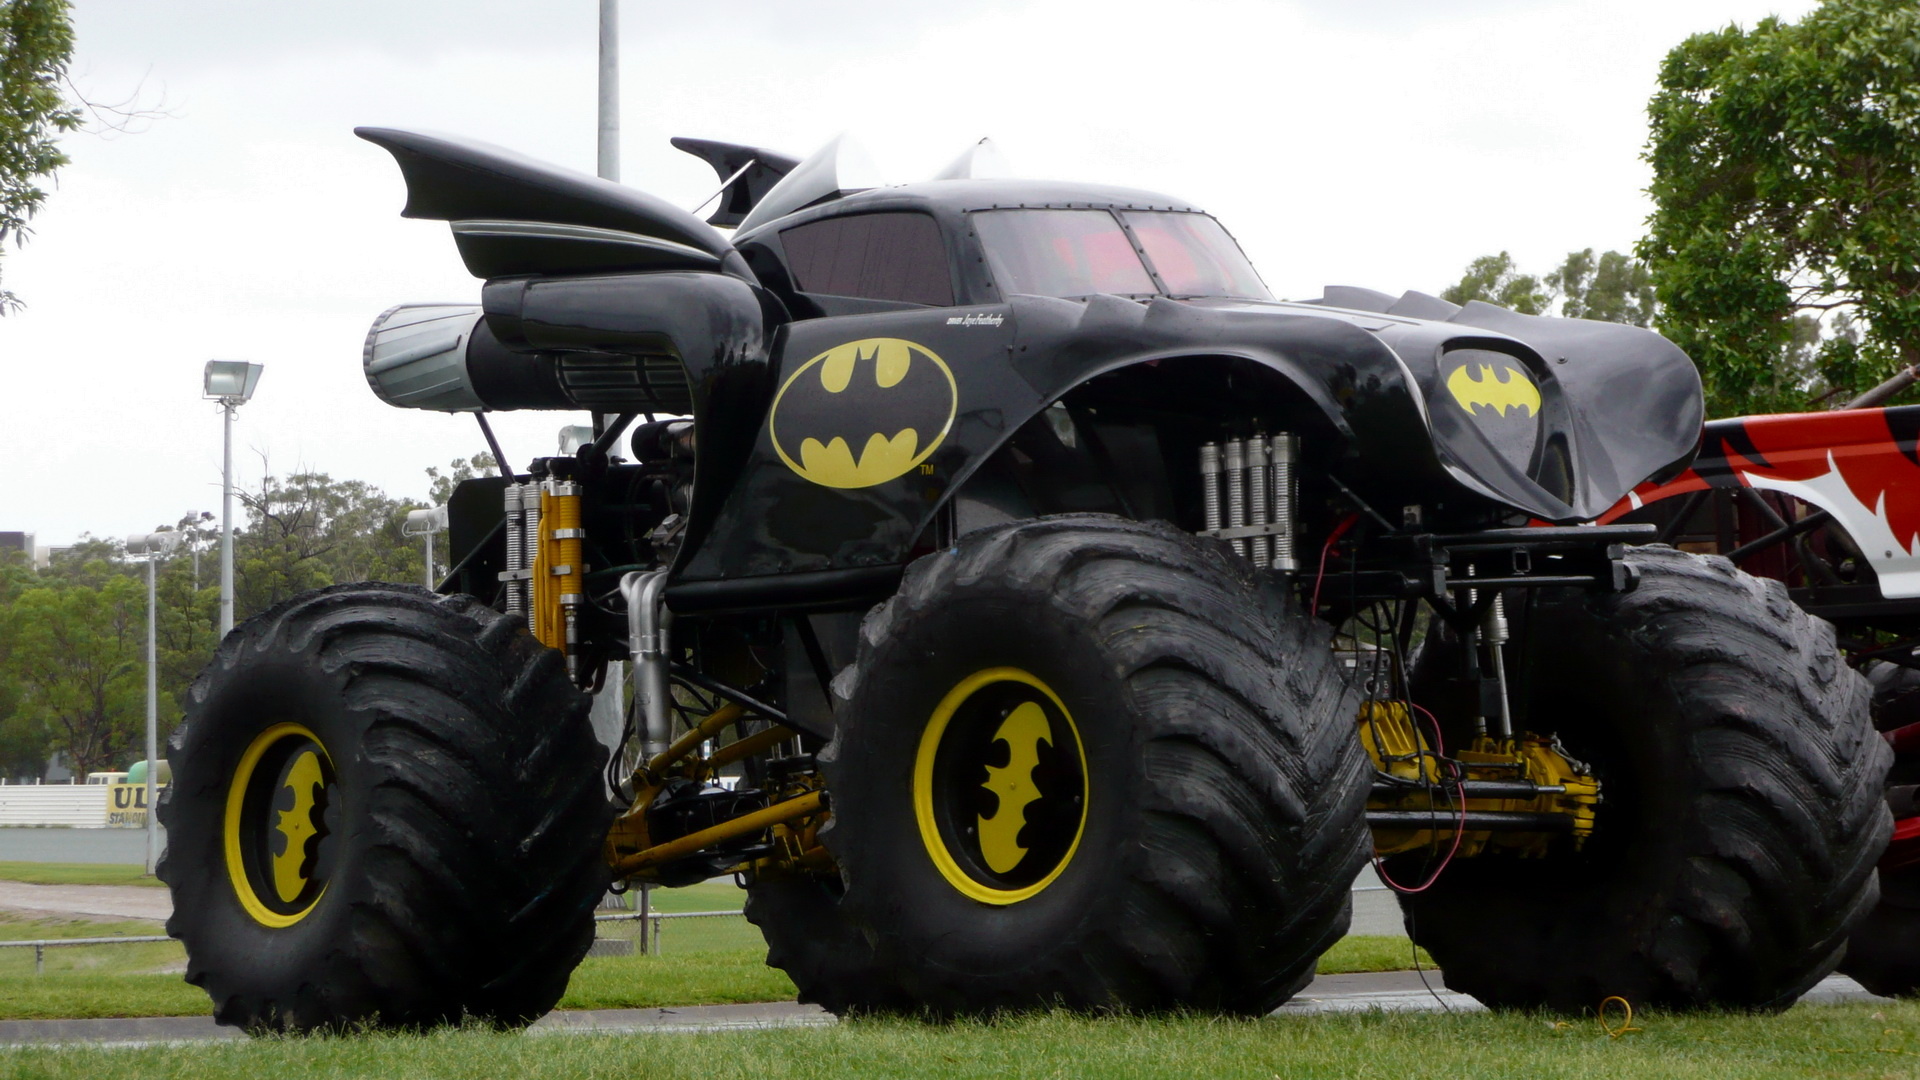 Monster Truck: Batman, Featured the design of the character's titular vehicle,The Batmobile. 1920x1080 Full HD Wallpaper.